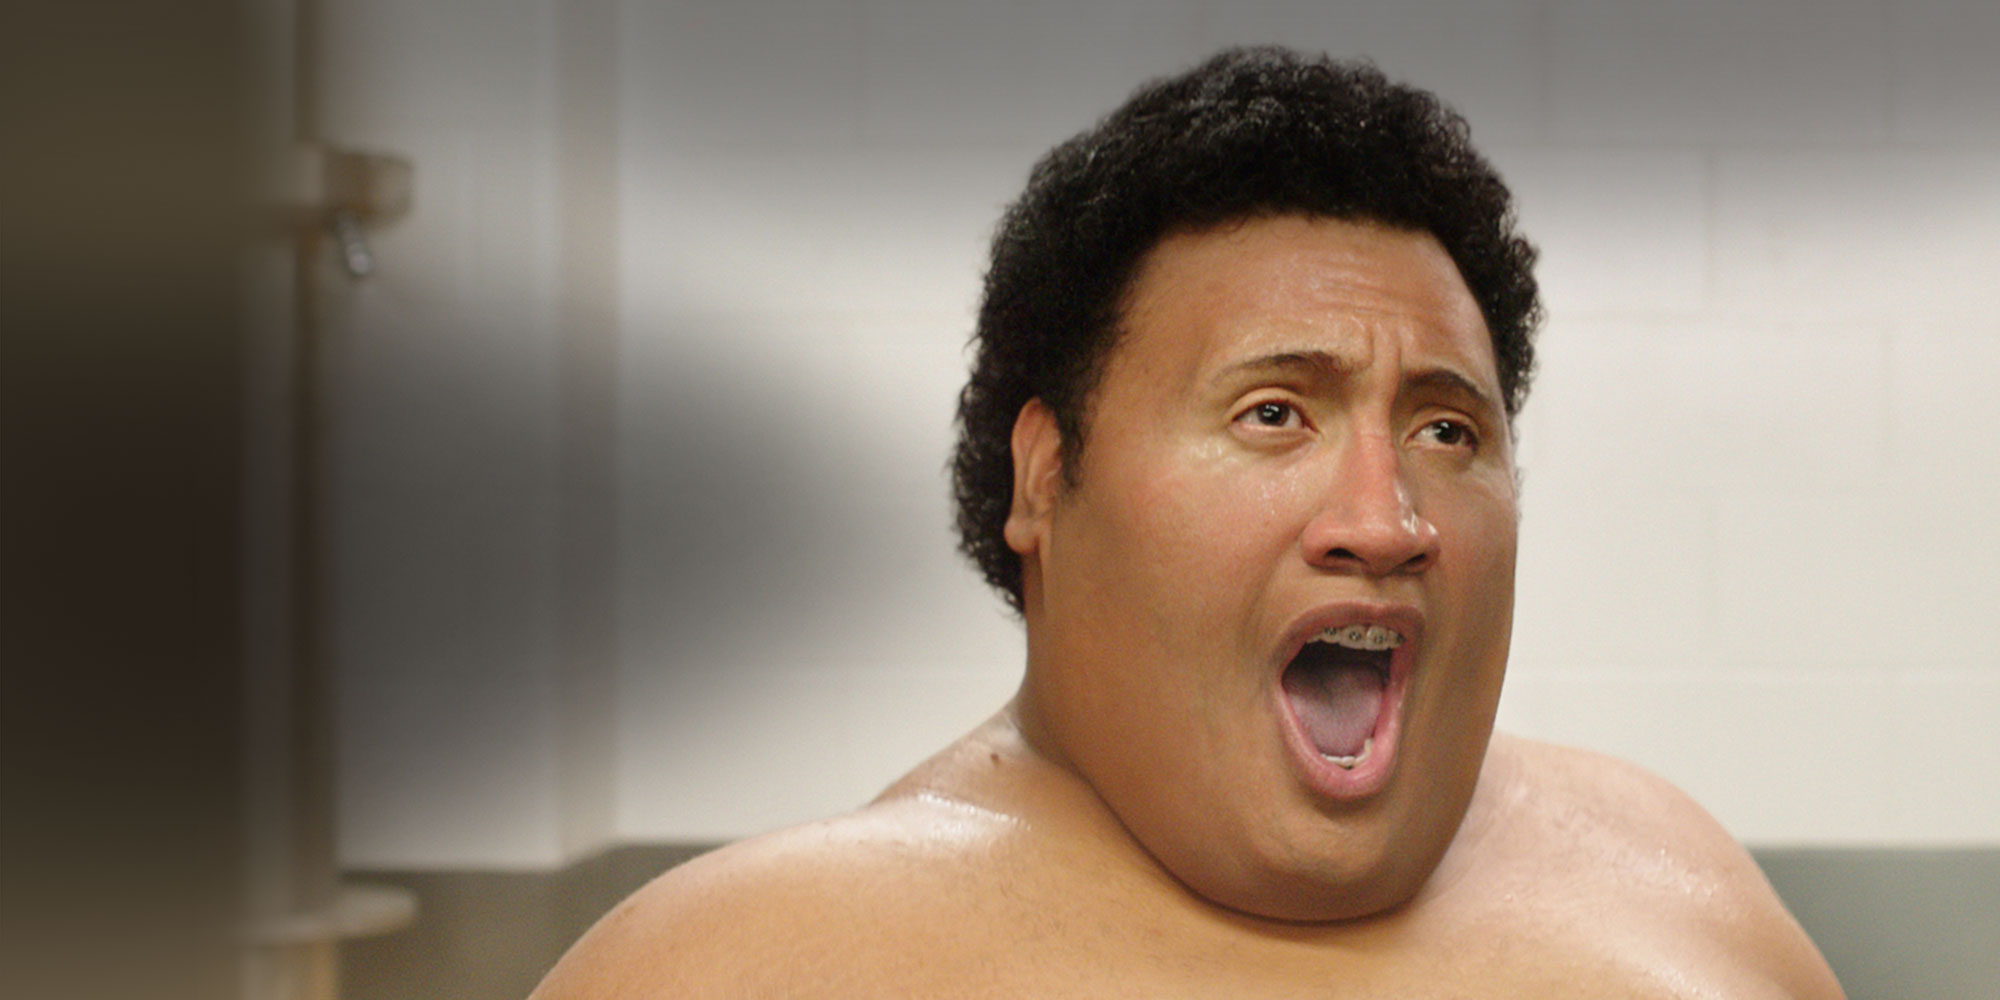 How The Rock Face Swapped with Vine Star Sione in 'Central